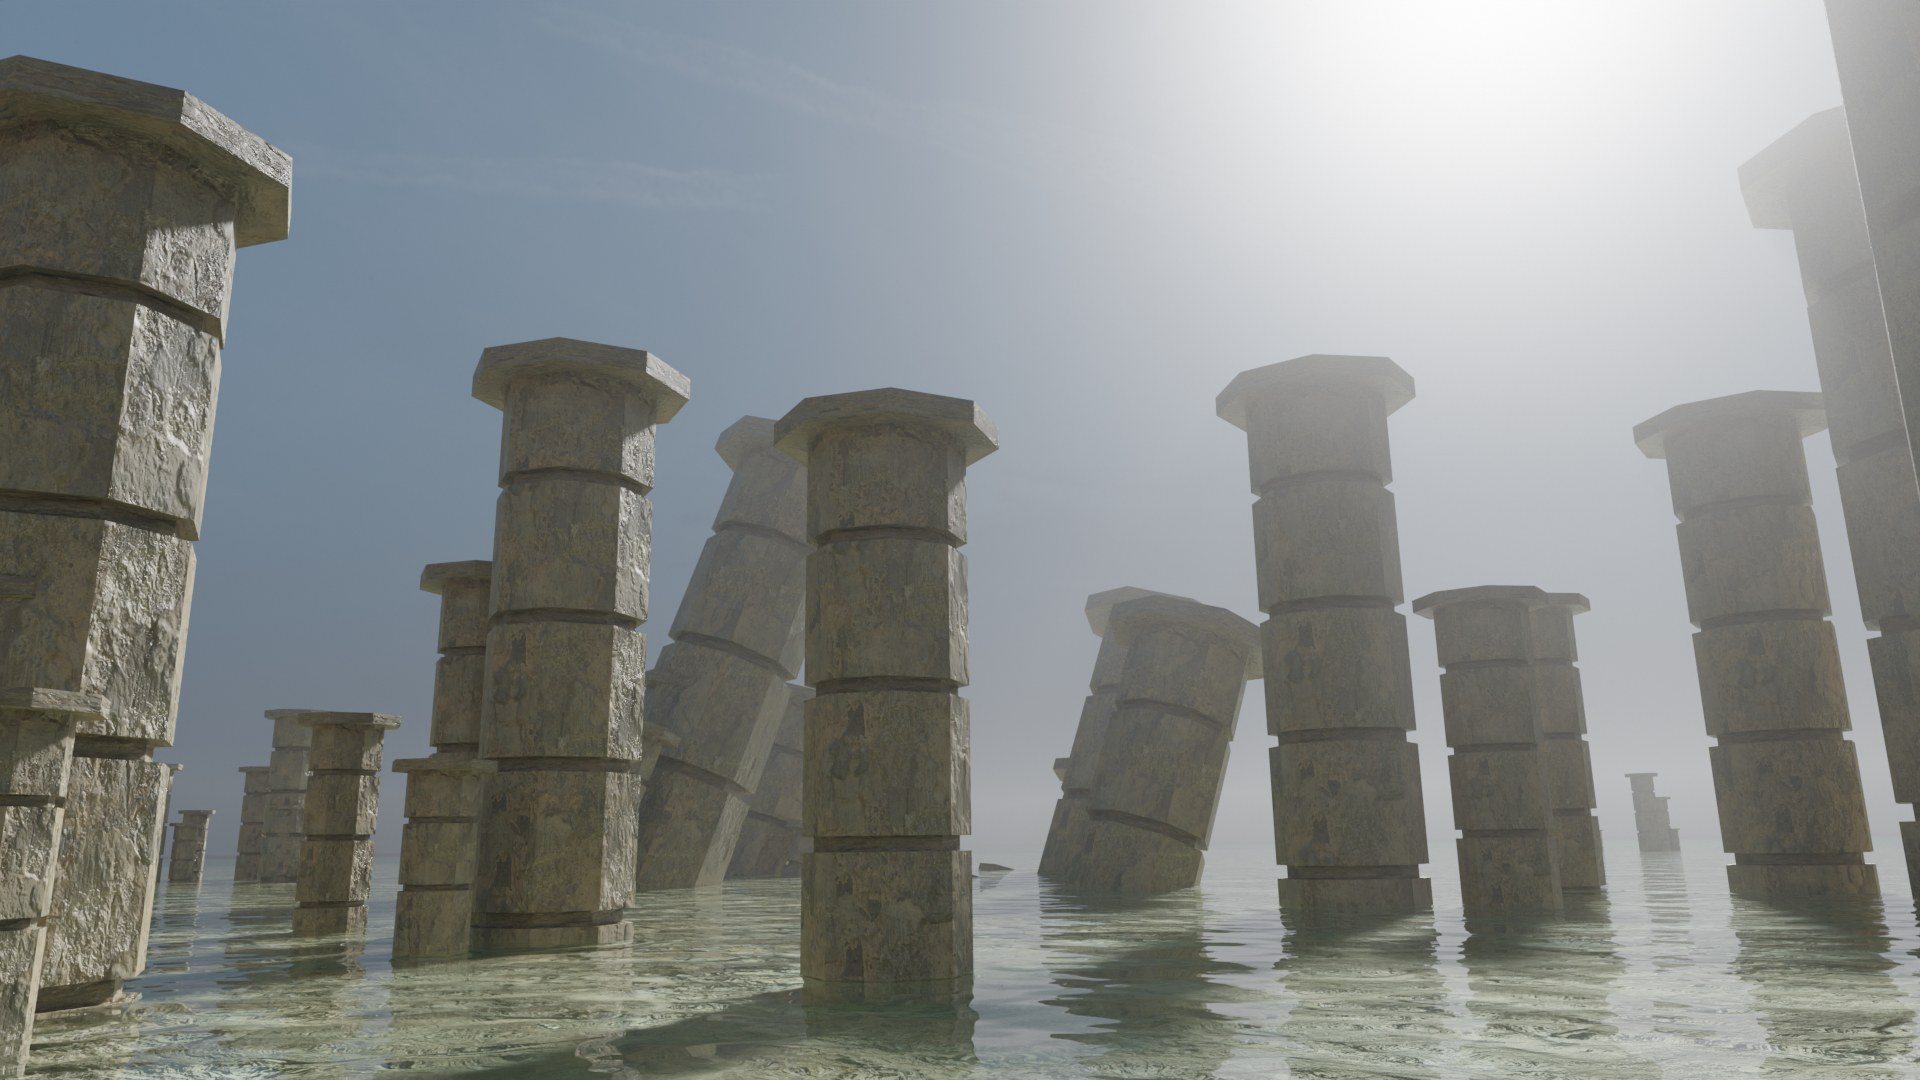 A 3D render of some scattered pillars standing in shallow water